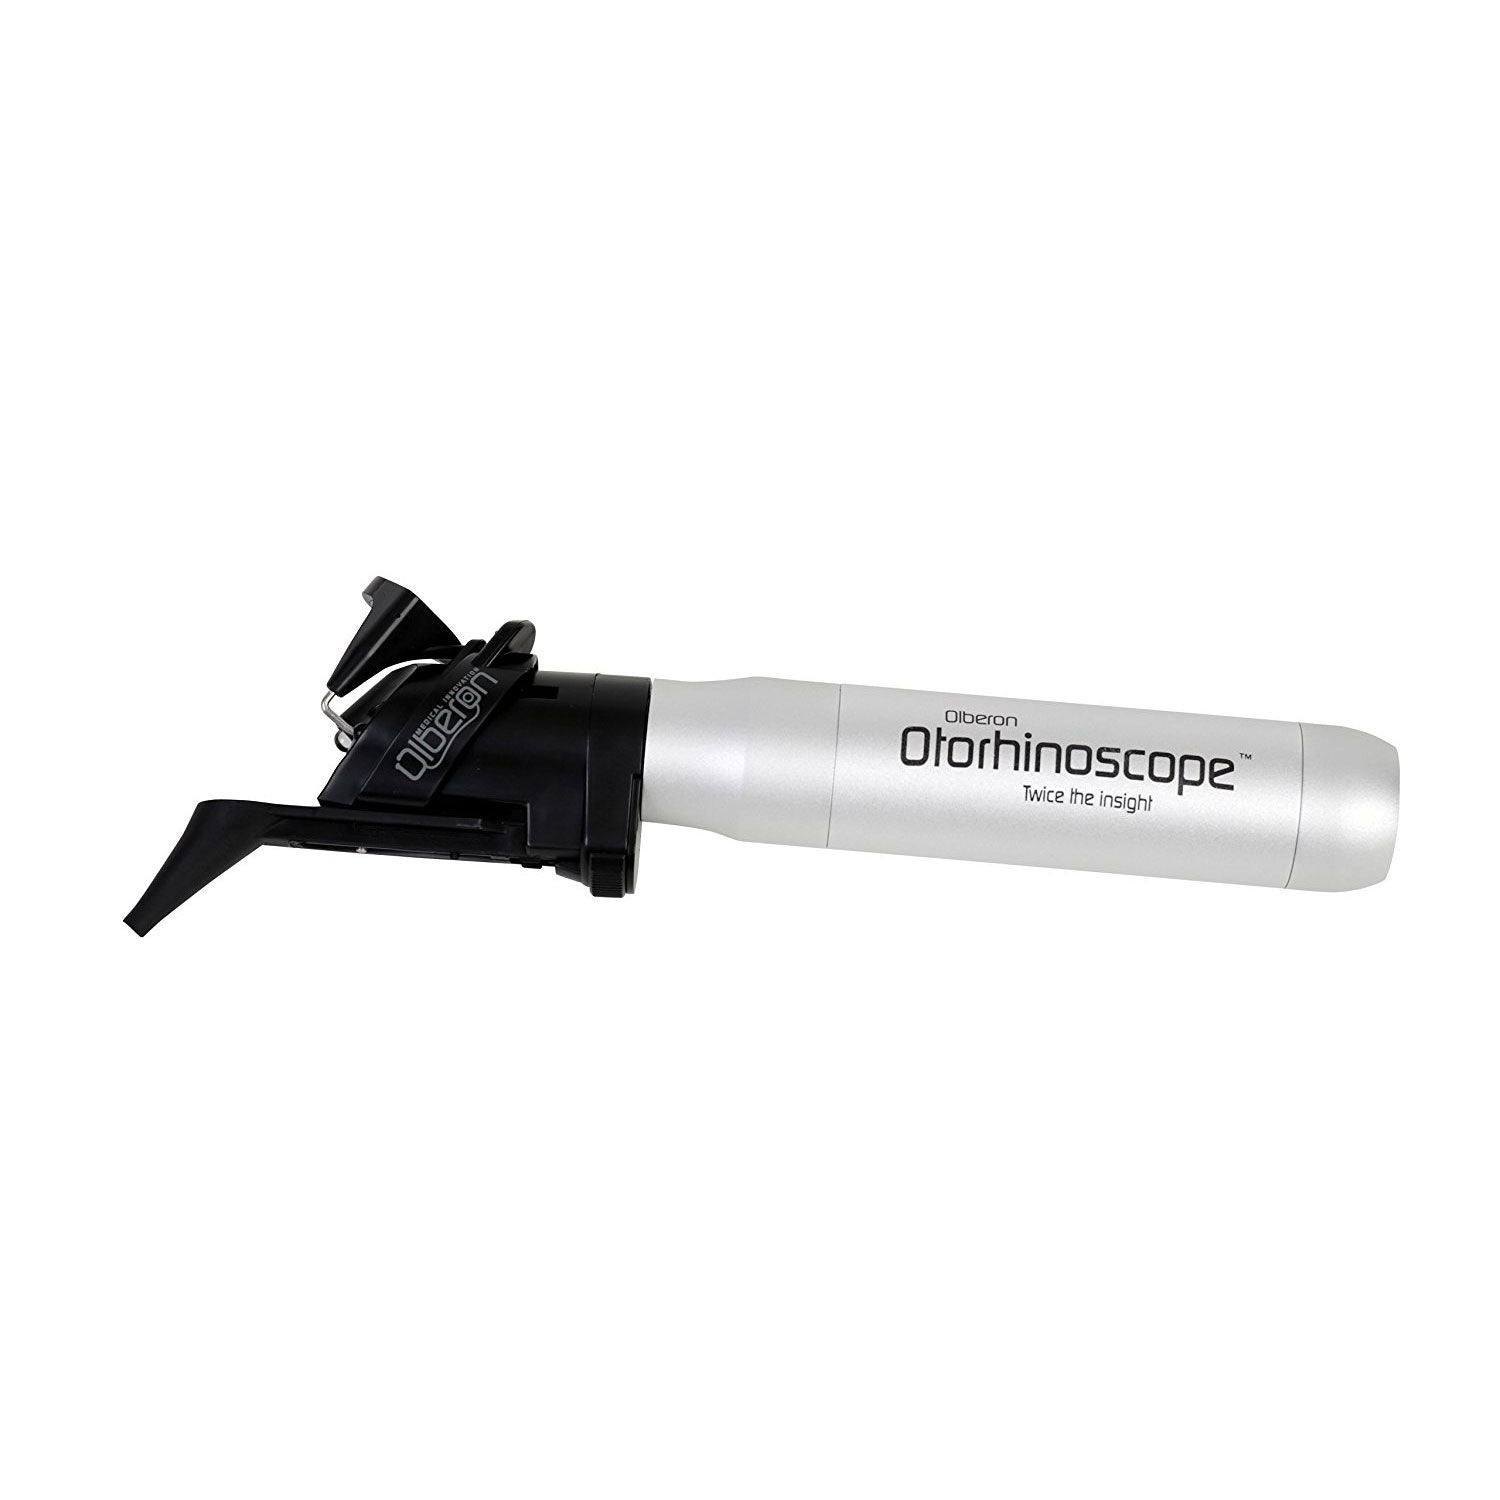 Otorhinoscope with 10 Disposable Speculums